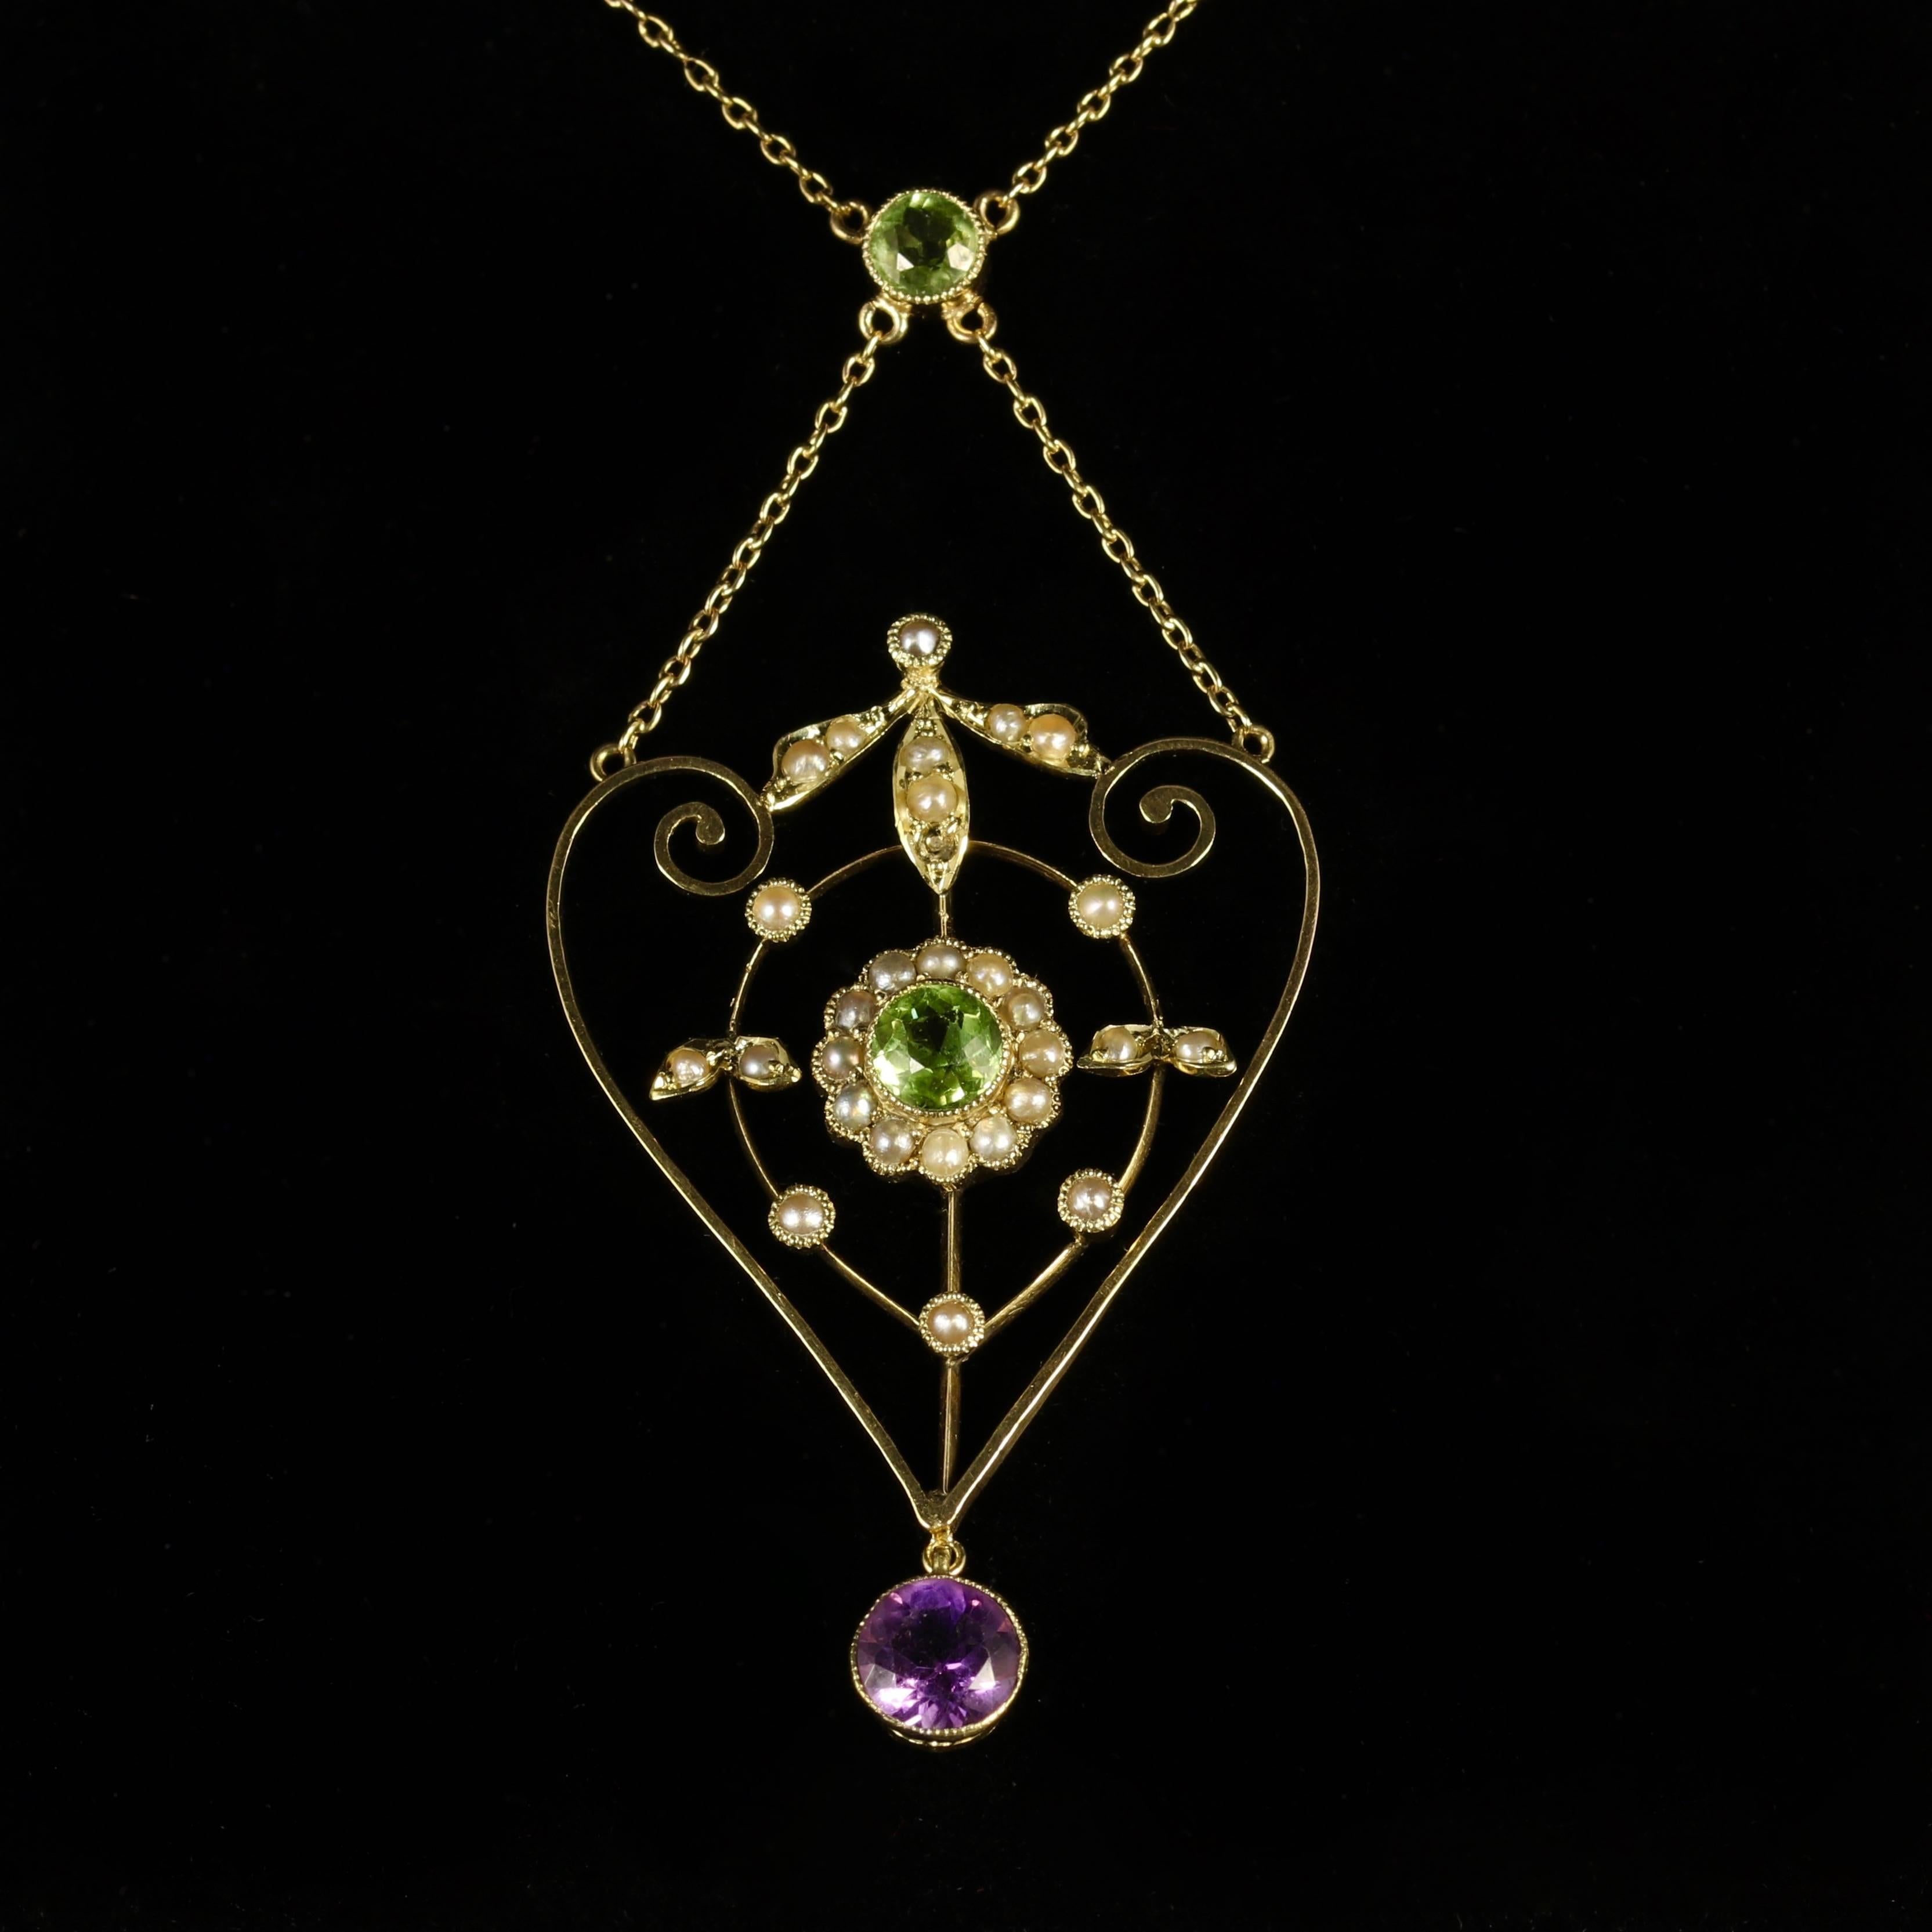 This genuine Victorian 9ct Yellow Gold pendant necklace is Circa 1900.

Set with a deep Purple Amethyst, rich Olive Green Peridots and lustrous Pearls.

Suffragettes liked to be depicted as feminine. Their jewellery was chosen to counter the